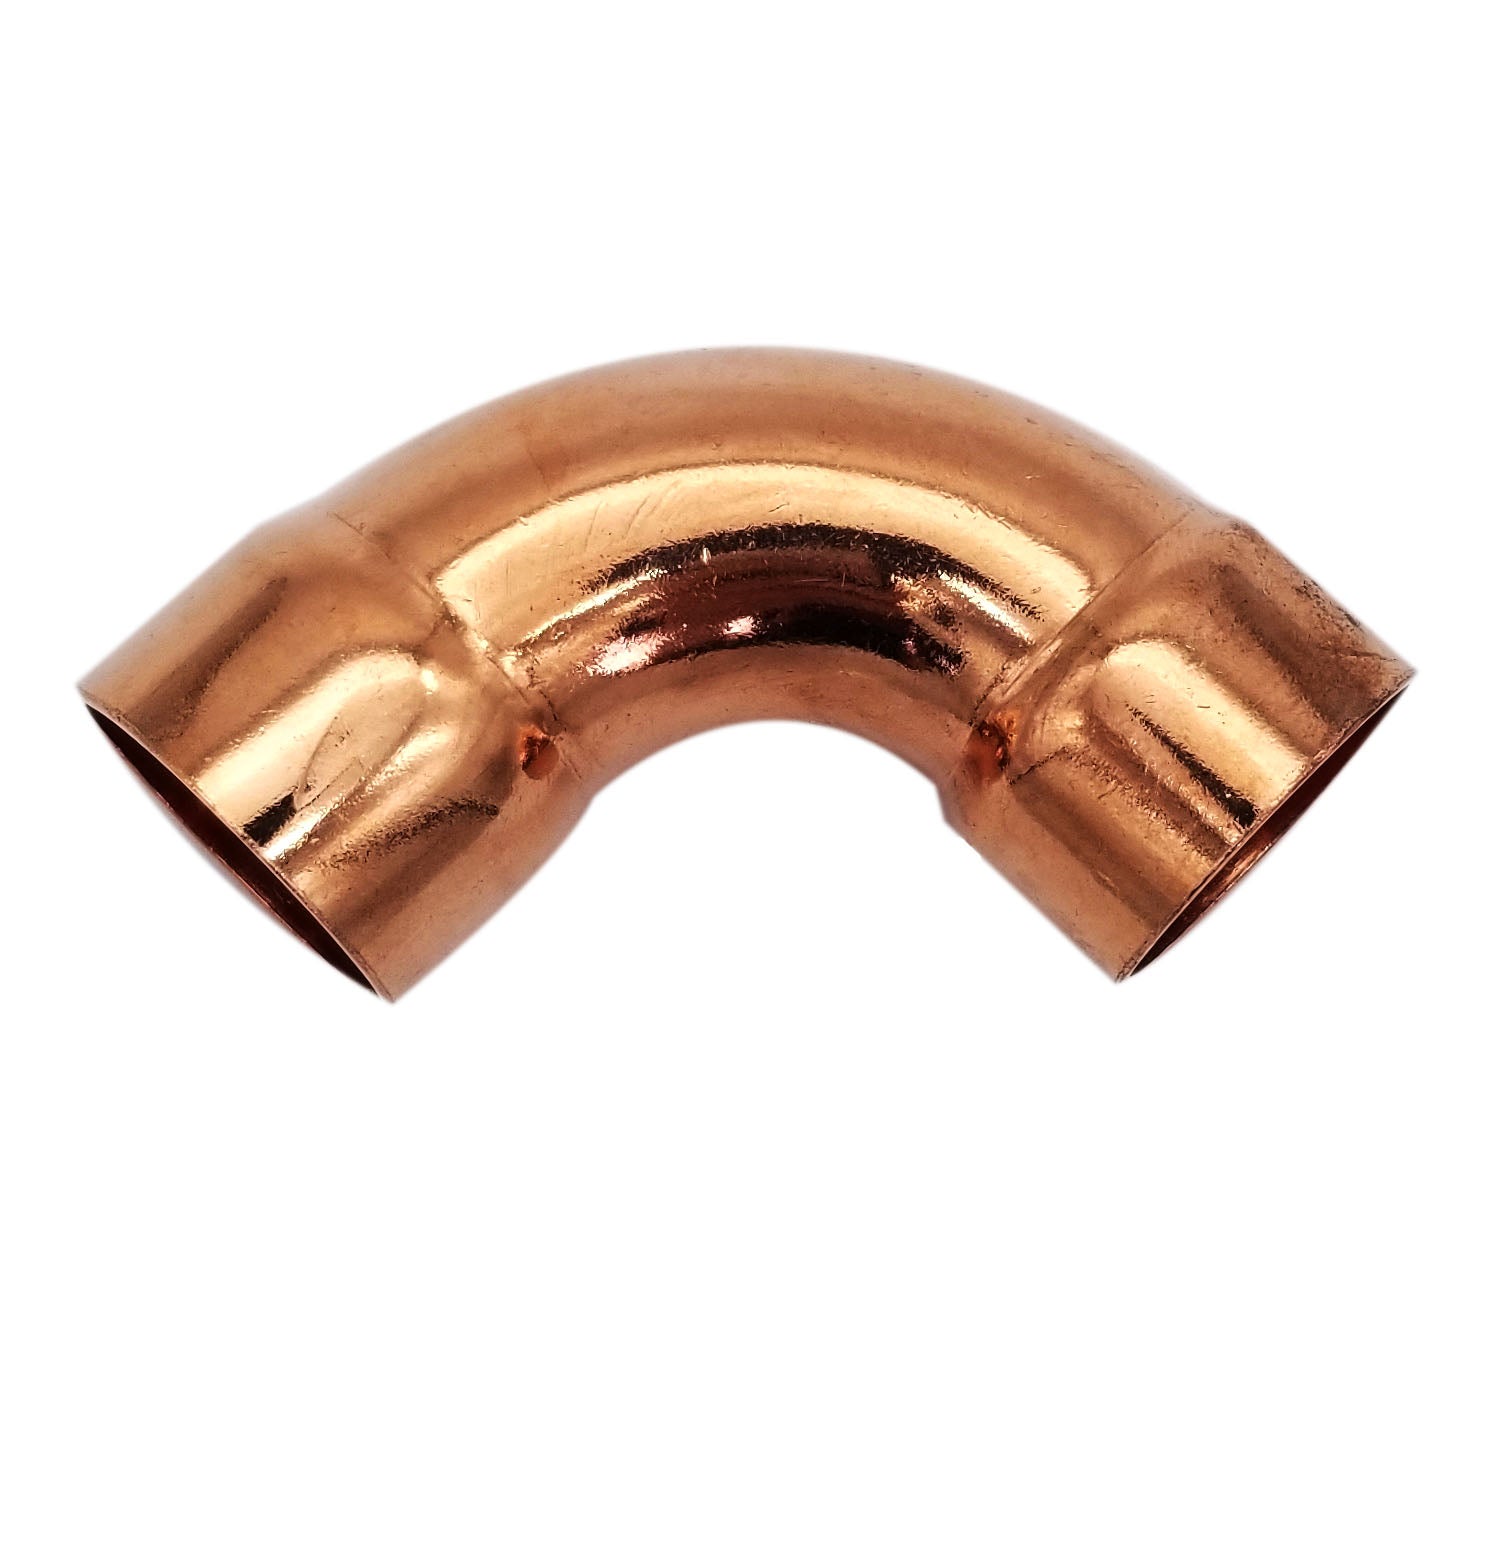 Copper Fitting 1/4 Inch (HVAC Outer Dimension) 1/8 Inch (Plumbing Inner Dimension) - Copper Long Radius 90° Elbow Fitting with 2 Solder Cups & HVAC – 99.9% Pure Copper - 5 Pack